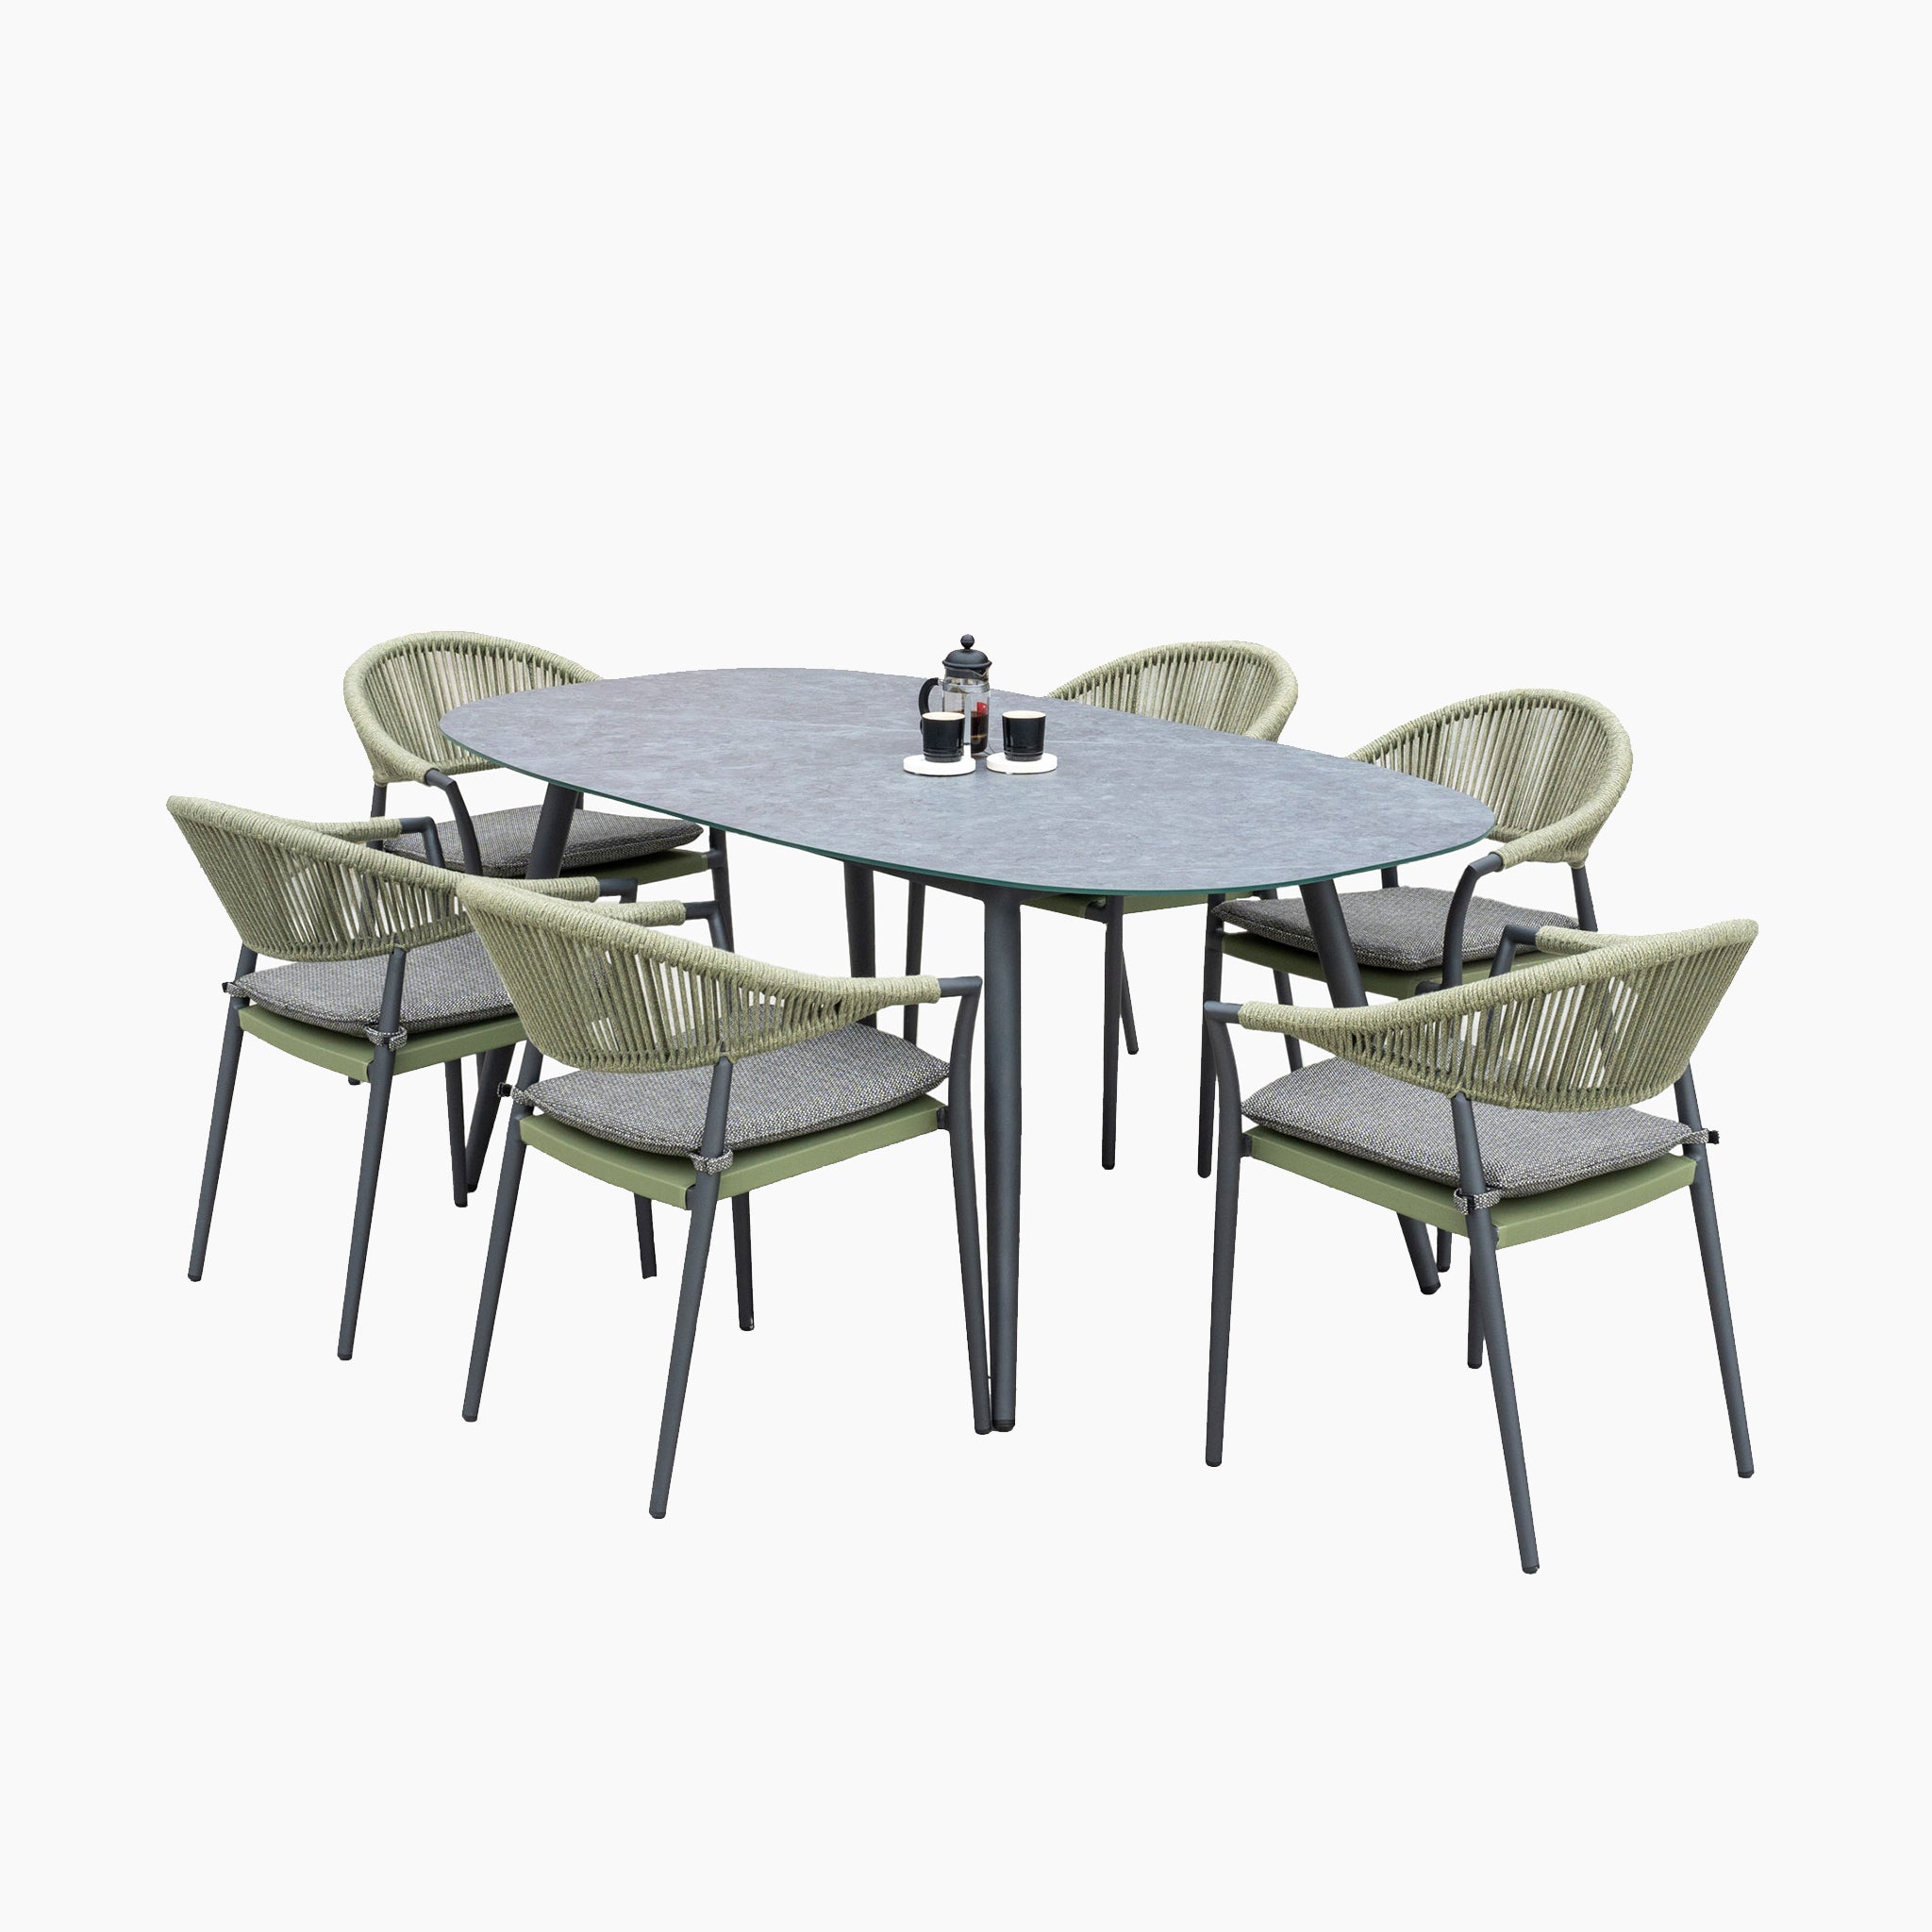 Cloverly 6 Seat Rope Oval Dining Set with Ceramic Table in Green